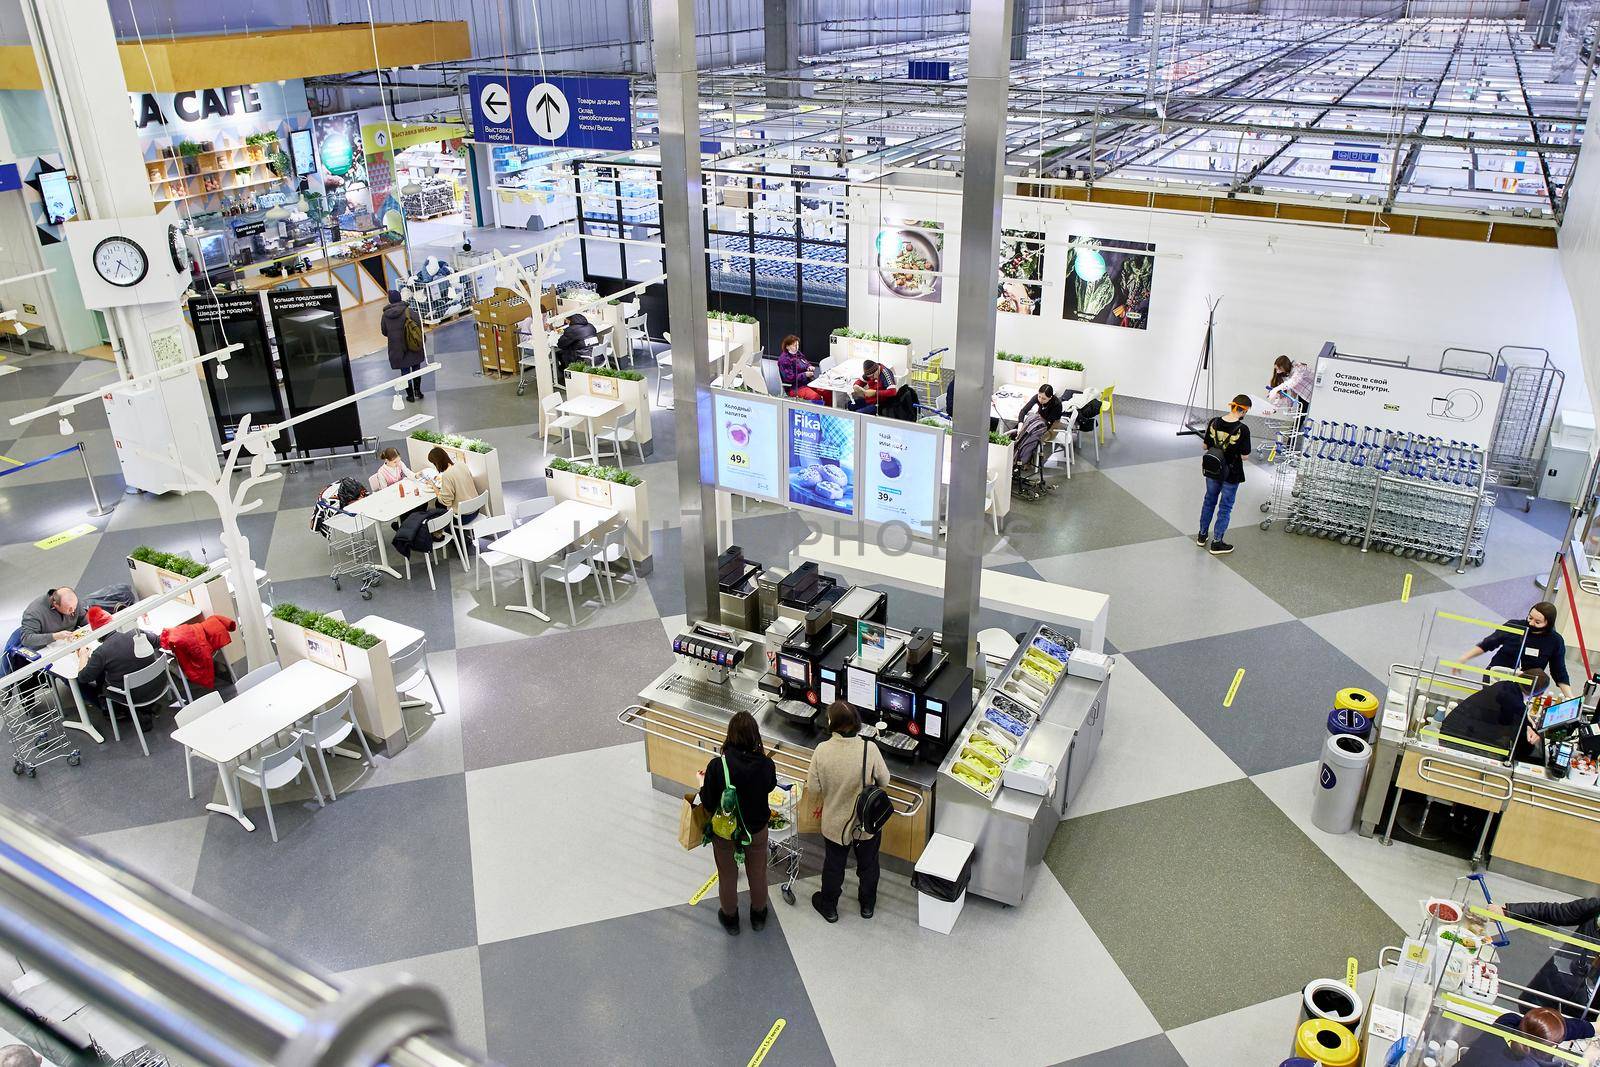 Samara, Russia - february 18, 2022: Restaurant in the IKEA Store. IKEA is the world's largest furniture retailer, founded in Sweden by vadiar